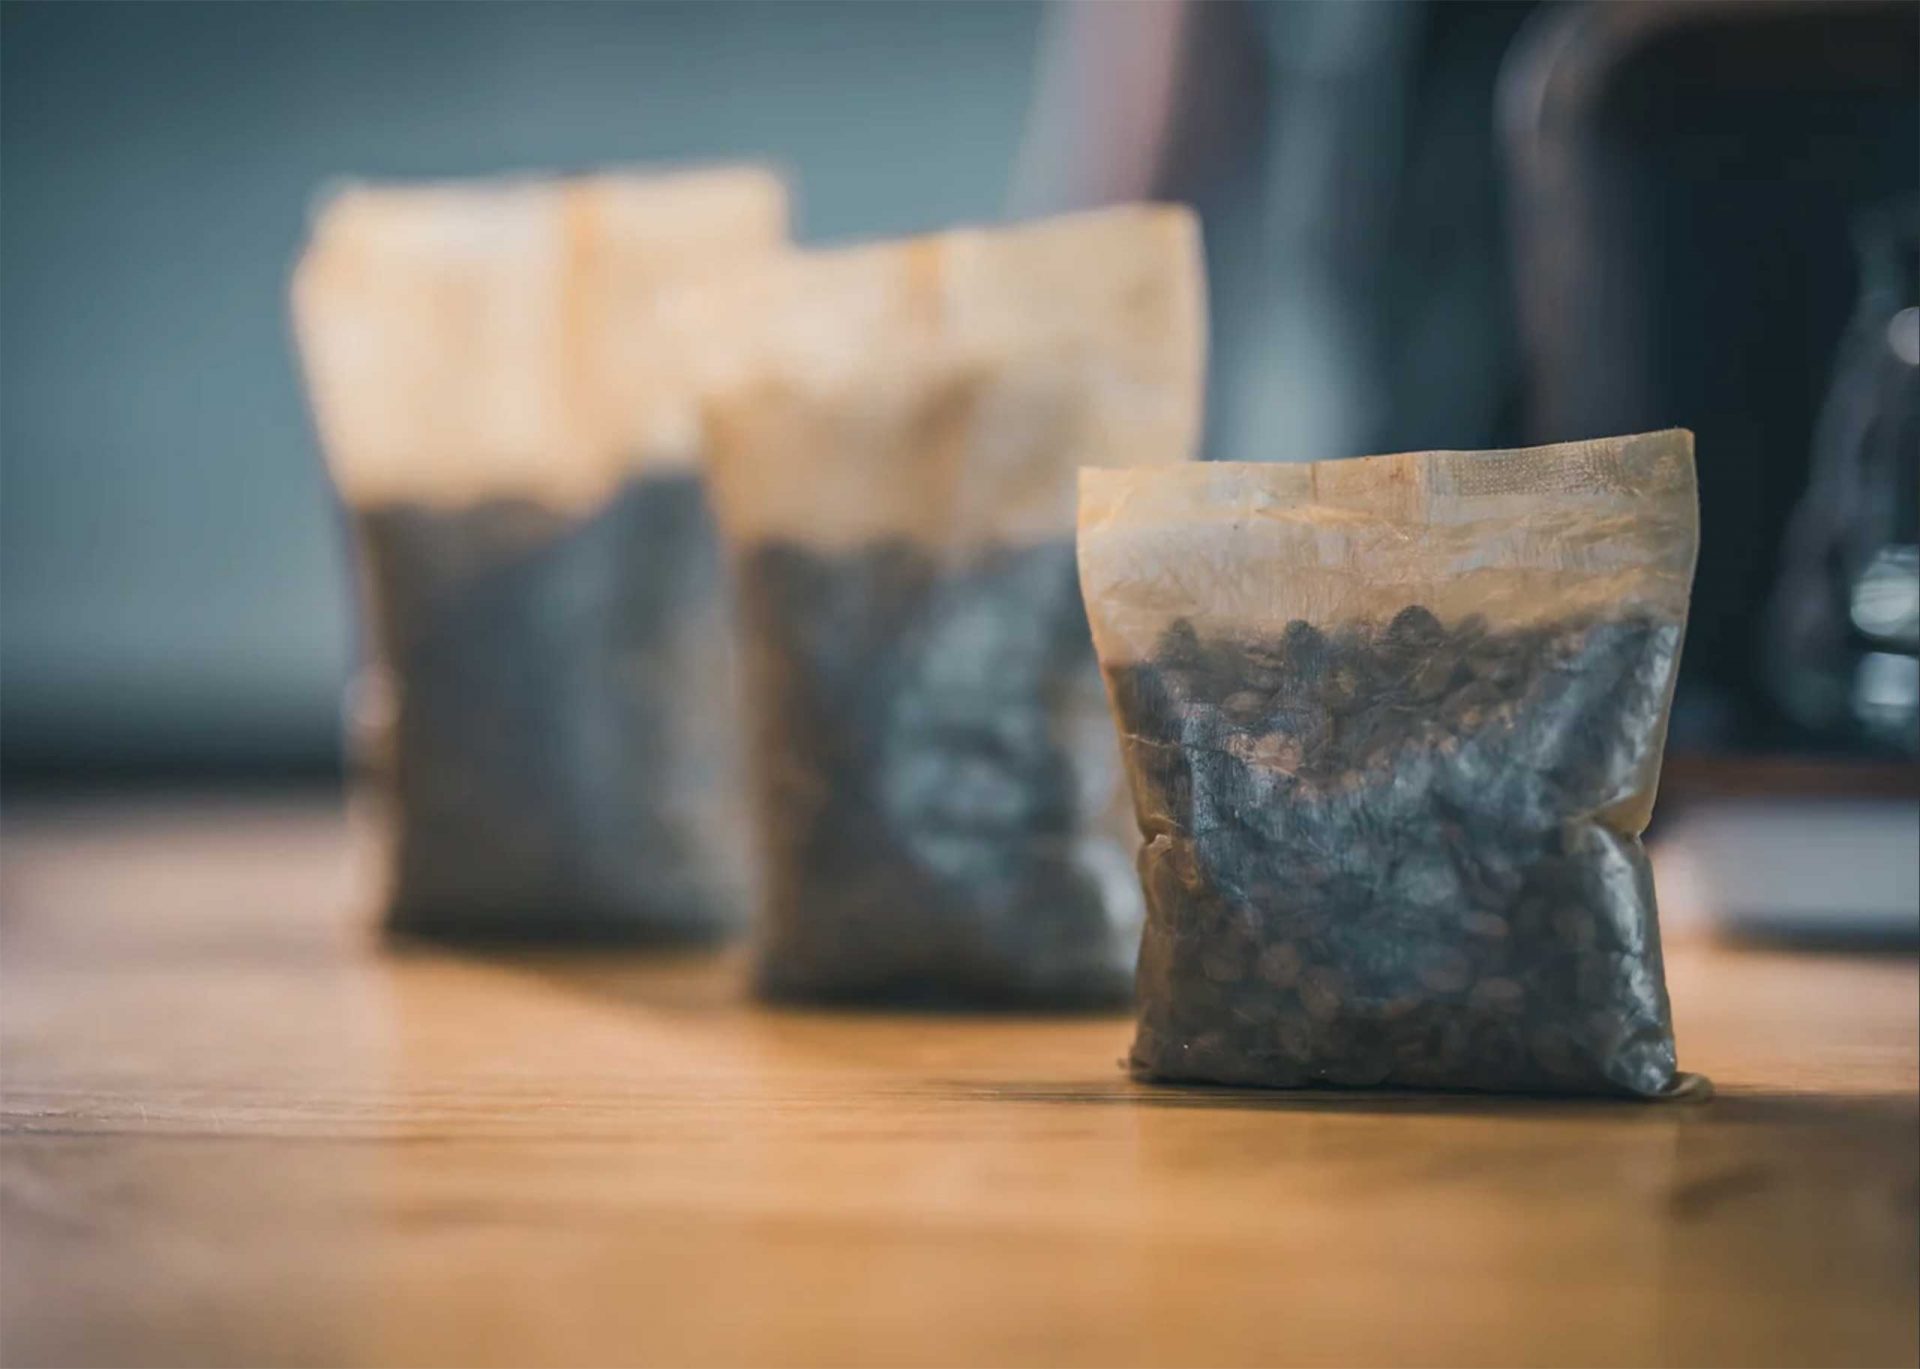 MILK MaterialLab Alternatives to plastic: MakeGrowLab's packaging made from woven biowaste.